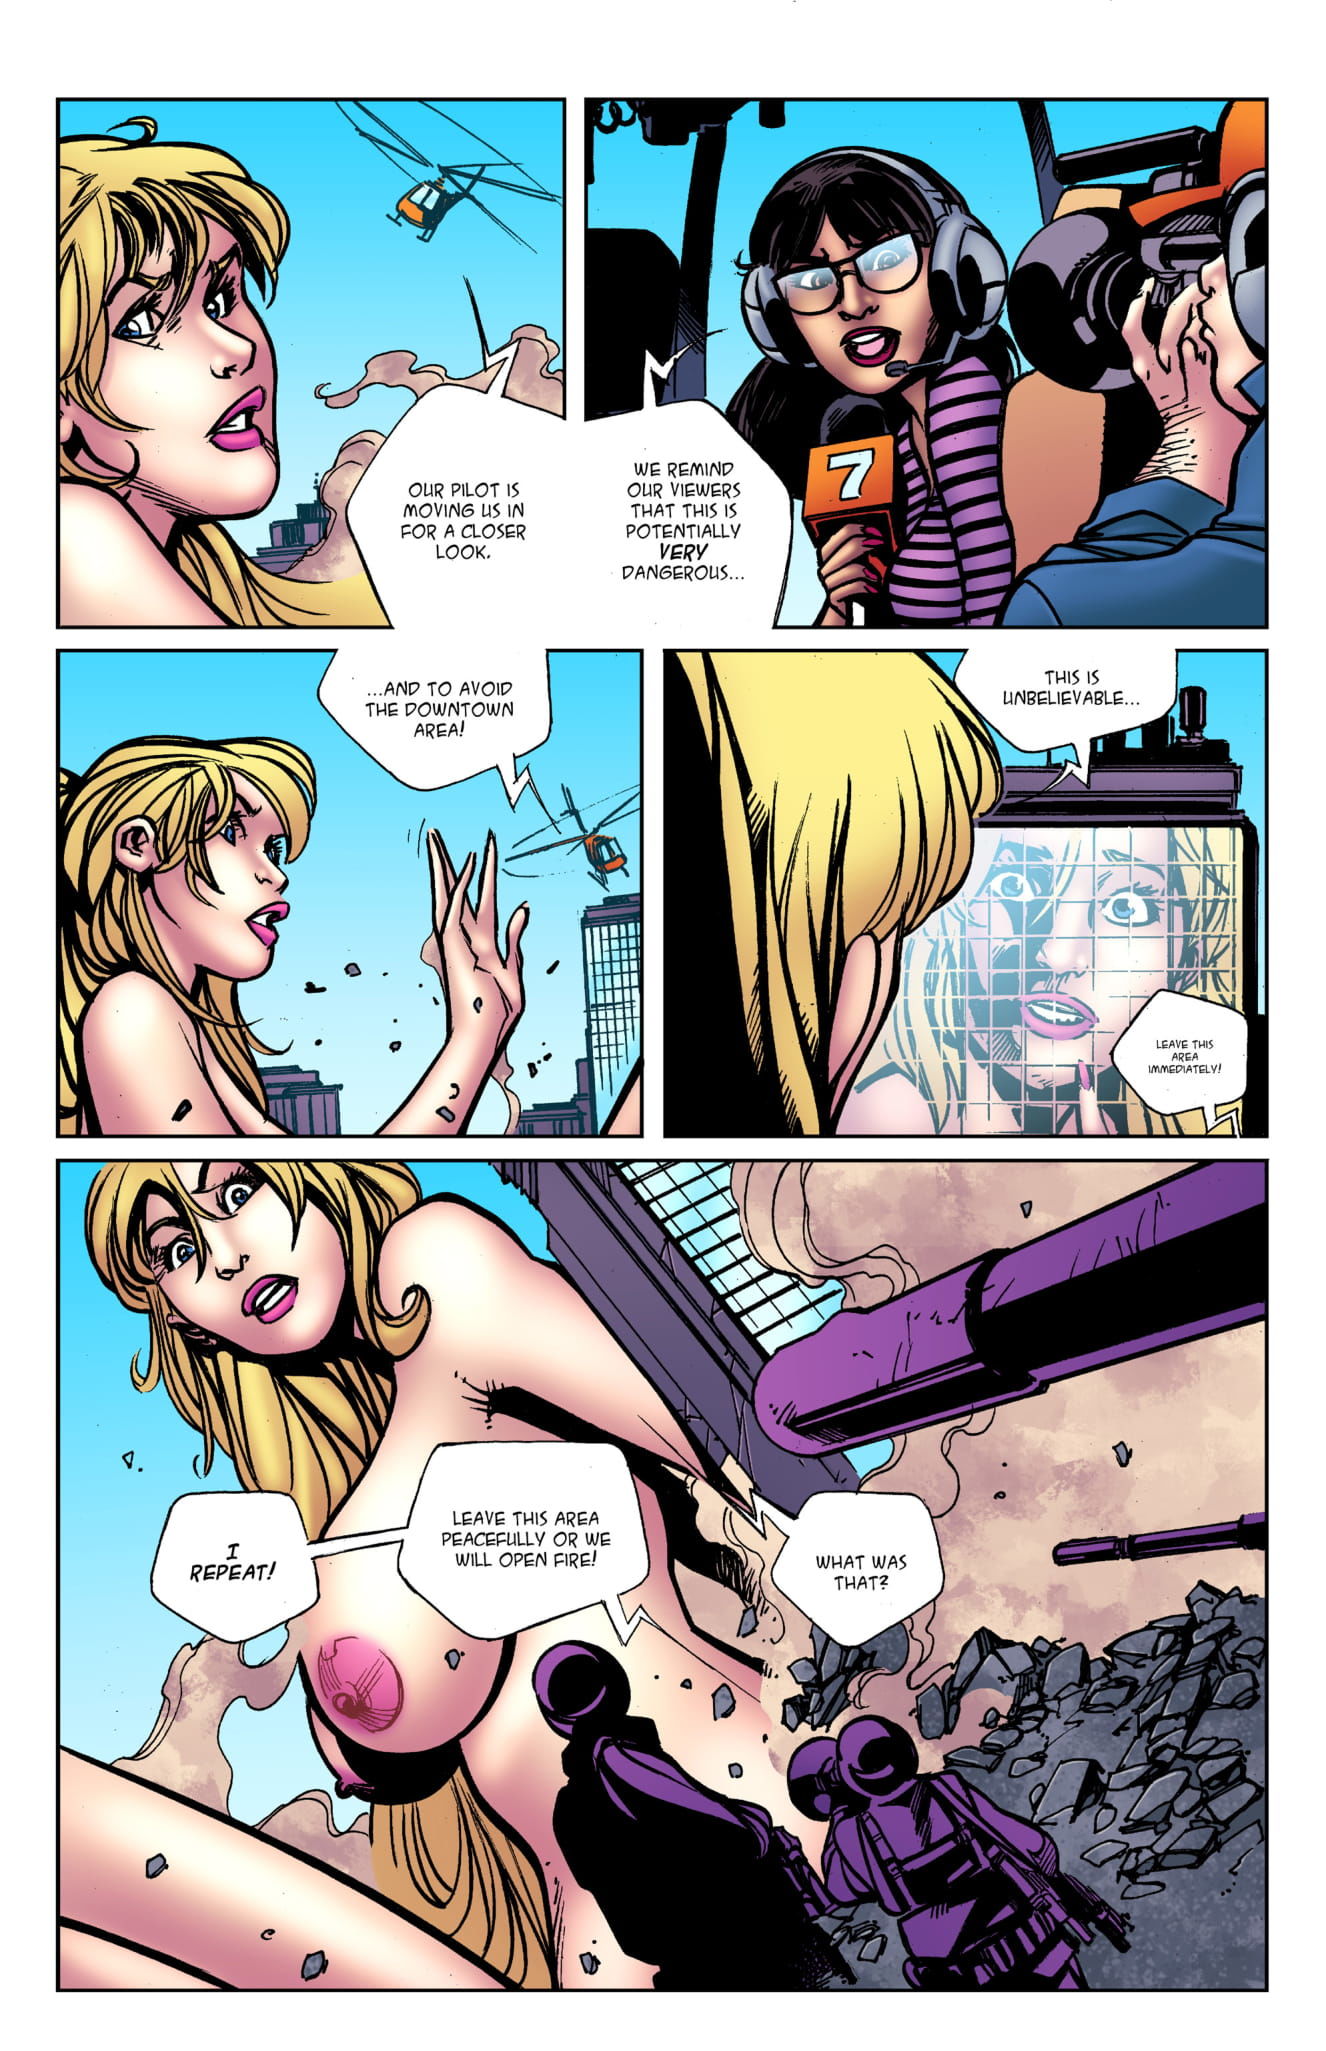 Ascension Issue 02 by BotComics page 4